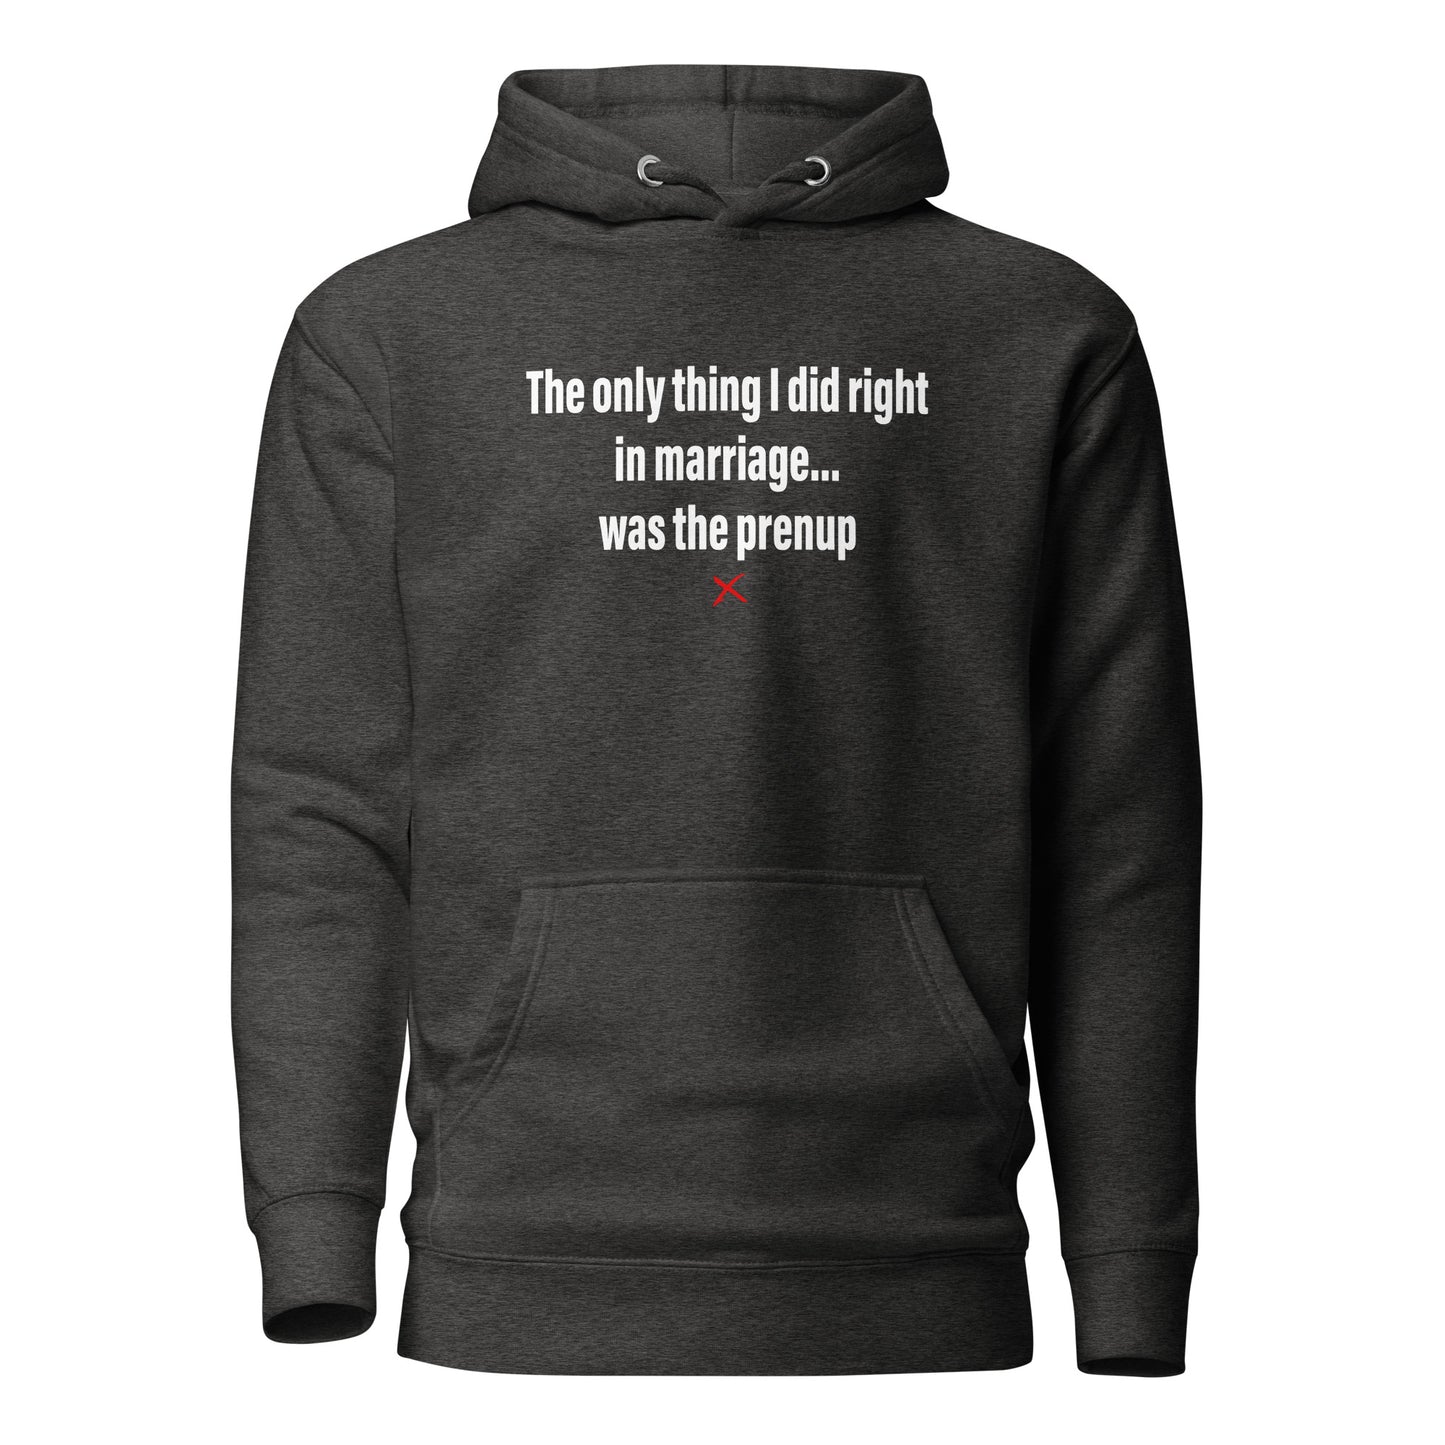 The only thing I did right in marriage... was the prenup - Hoodie